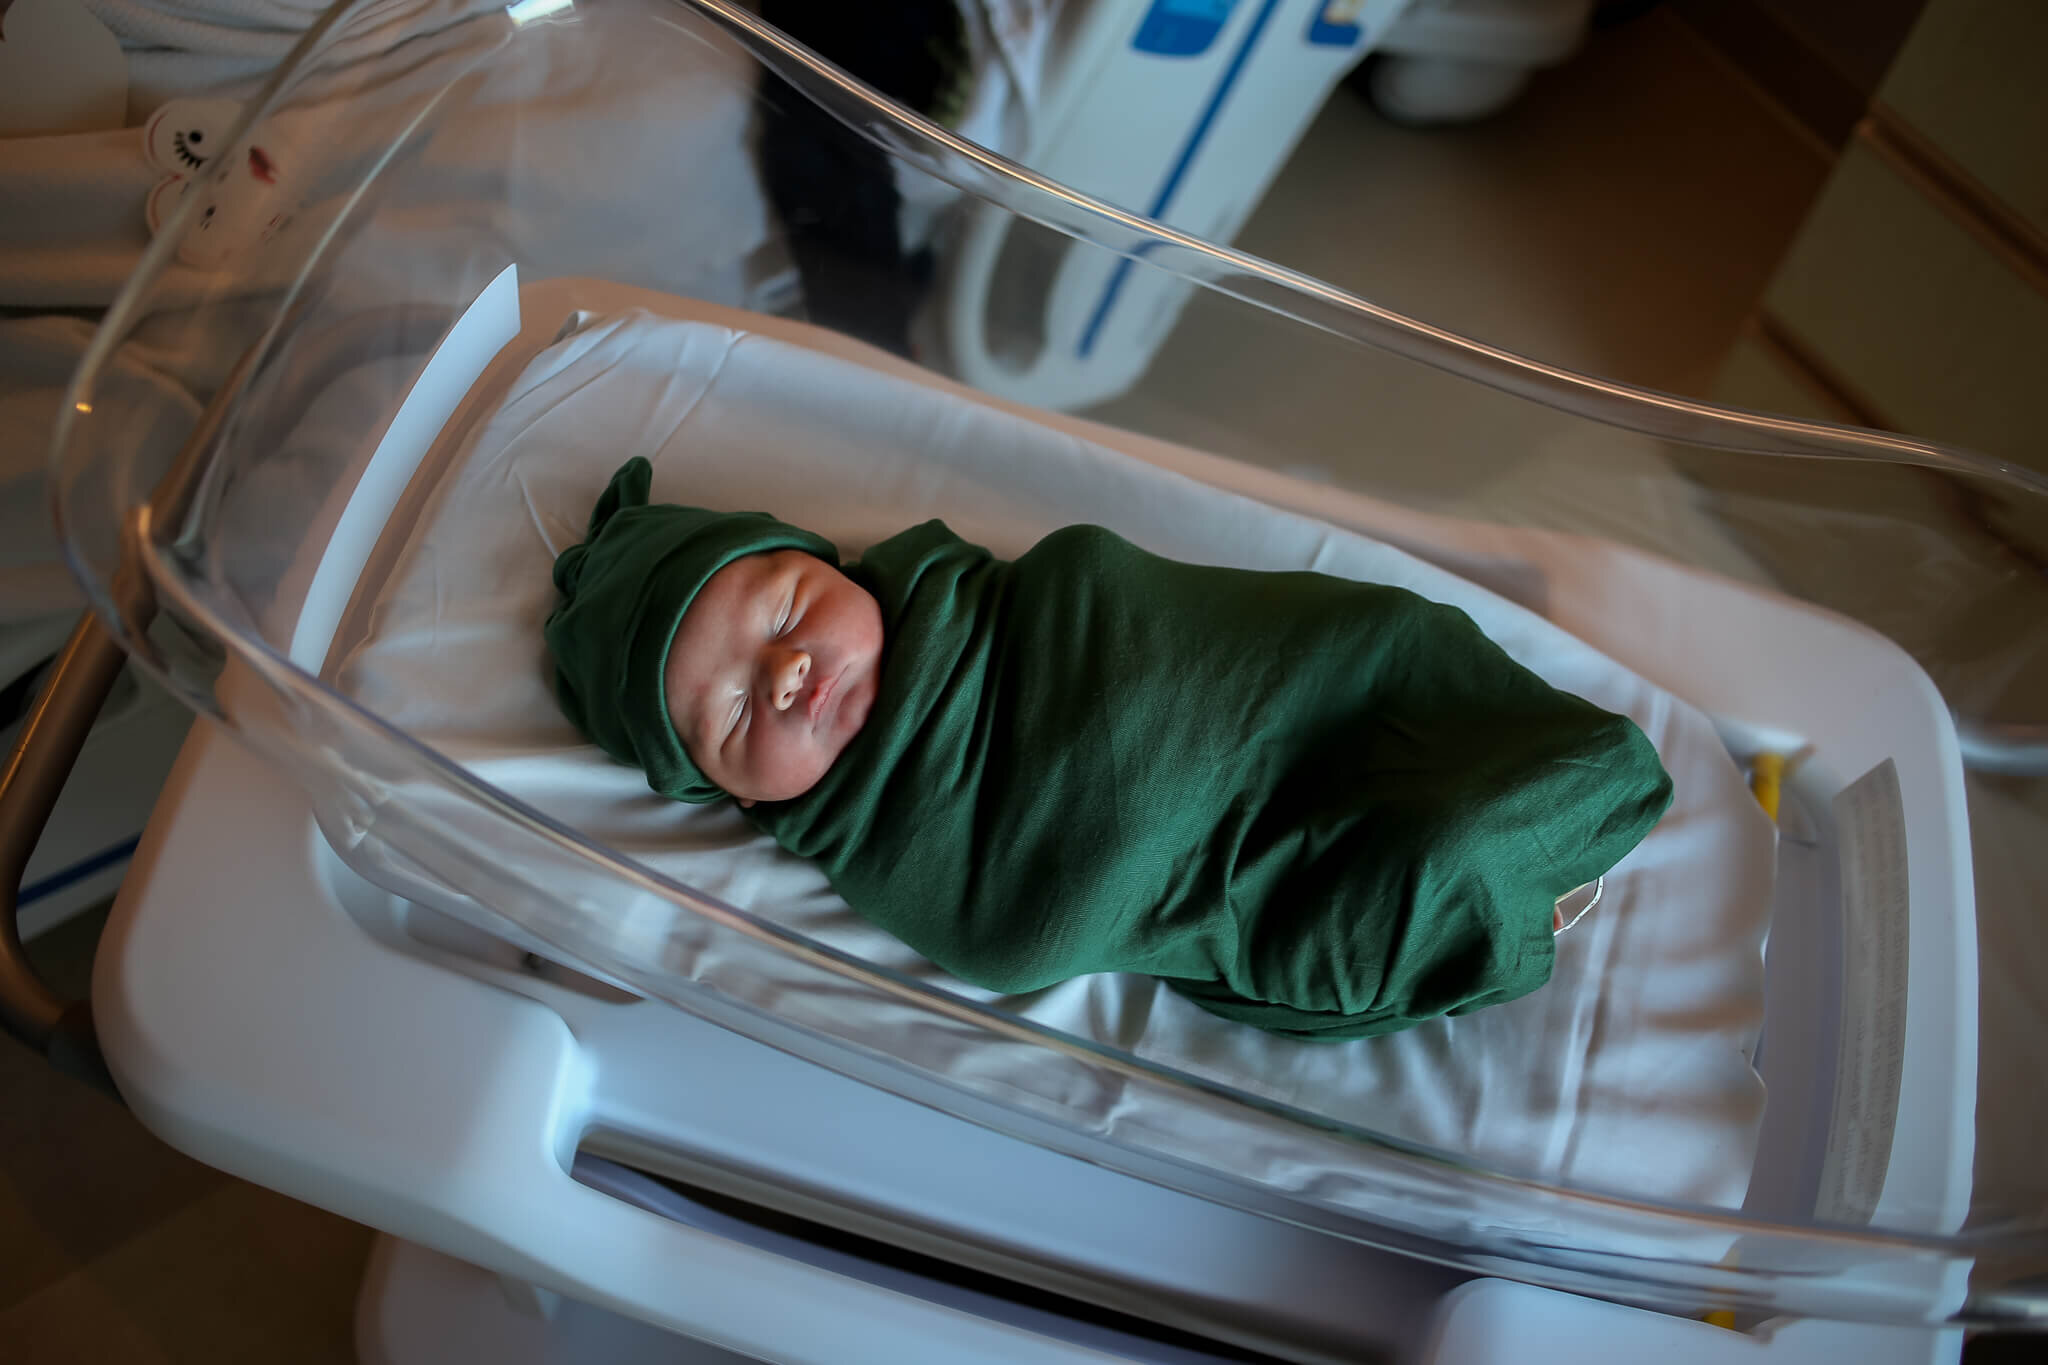  An image from above as the newborn baby lies in a hospital bassinet in his cap and tightly wrapped in a blanket from a session of fresh 48 baby pictures 